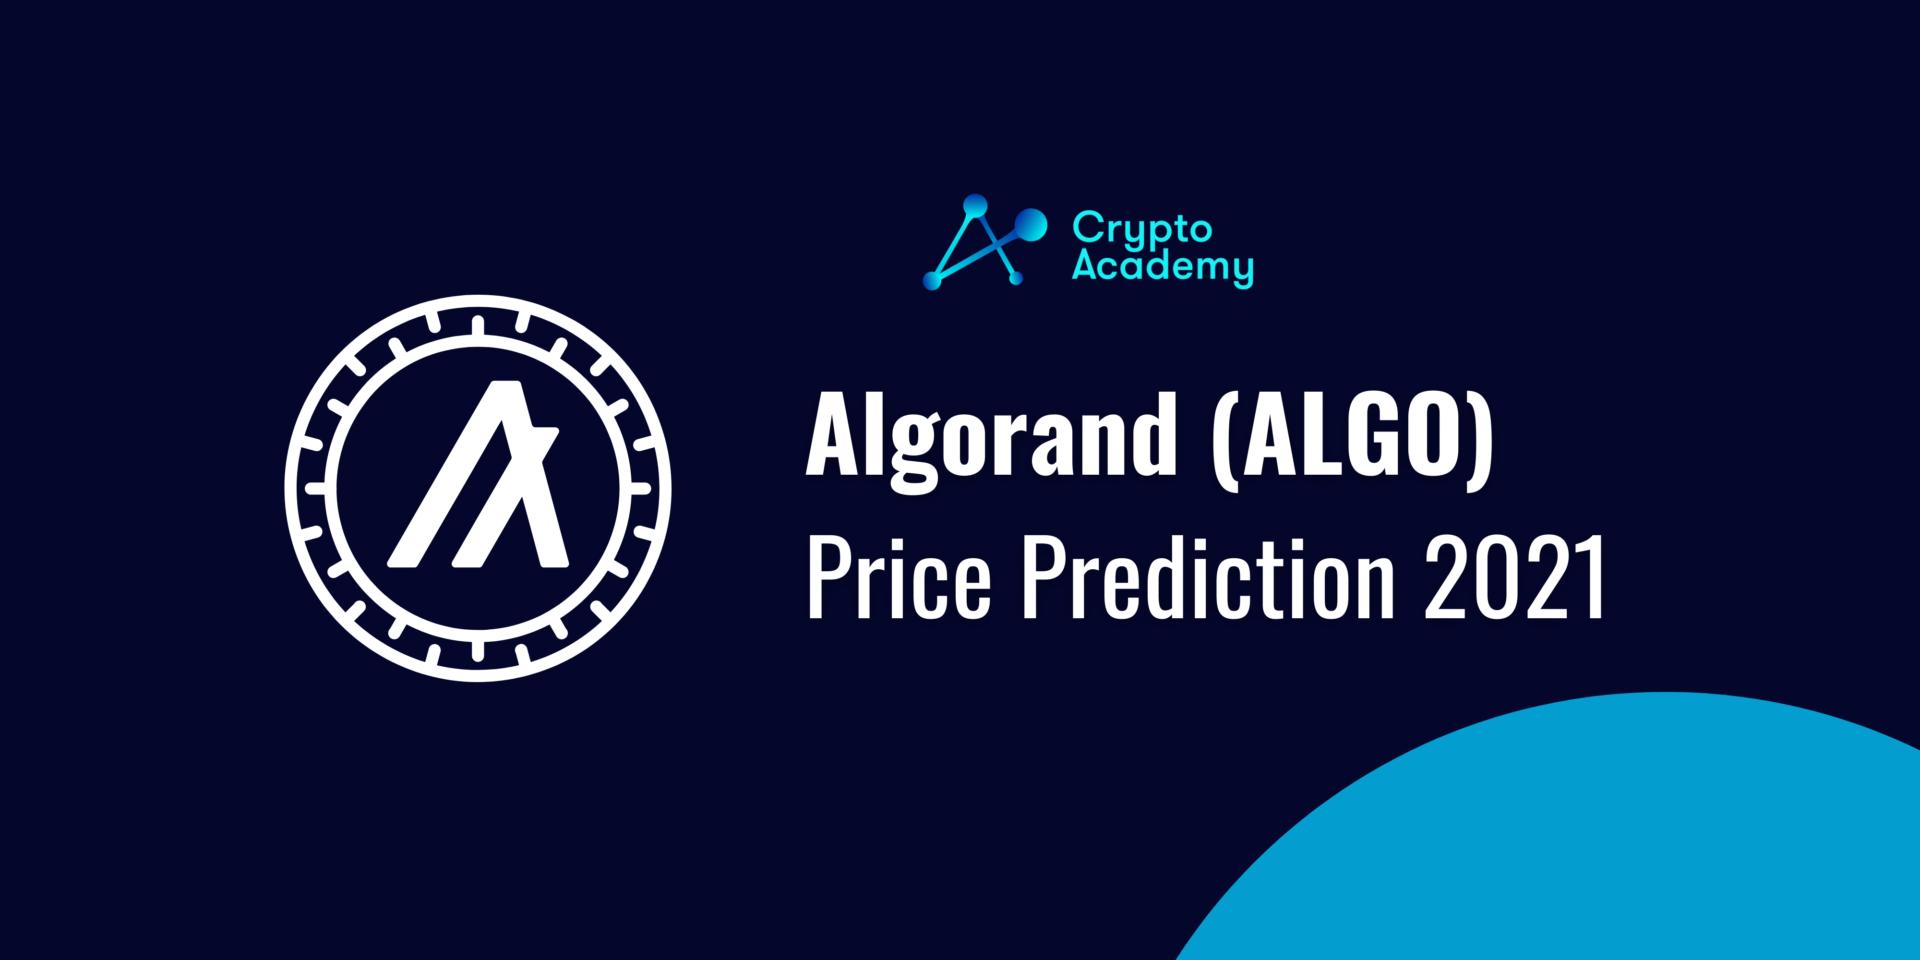 Algorand Price Prediction 2021 and Beyond - Is ALGO a Good Investment?